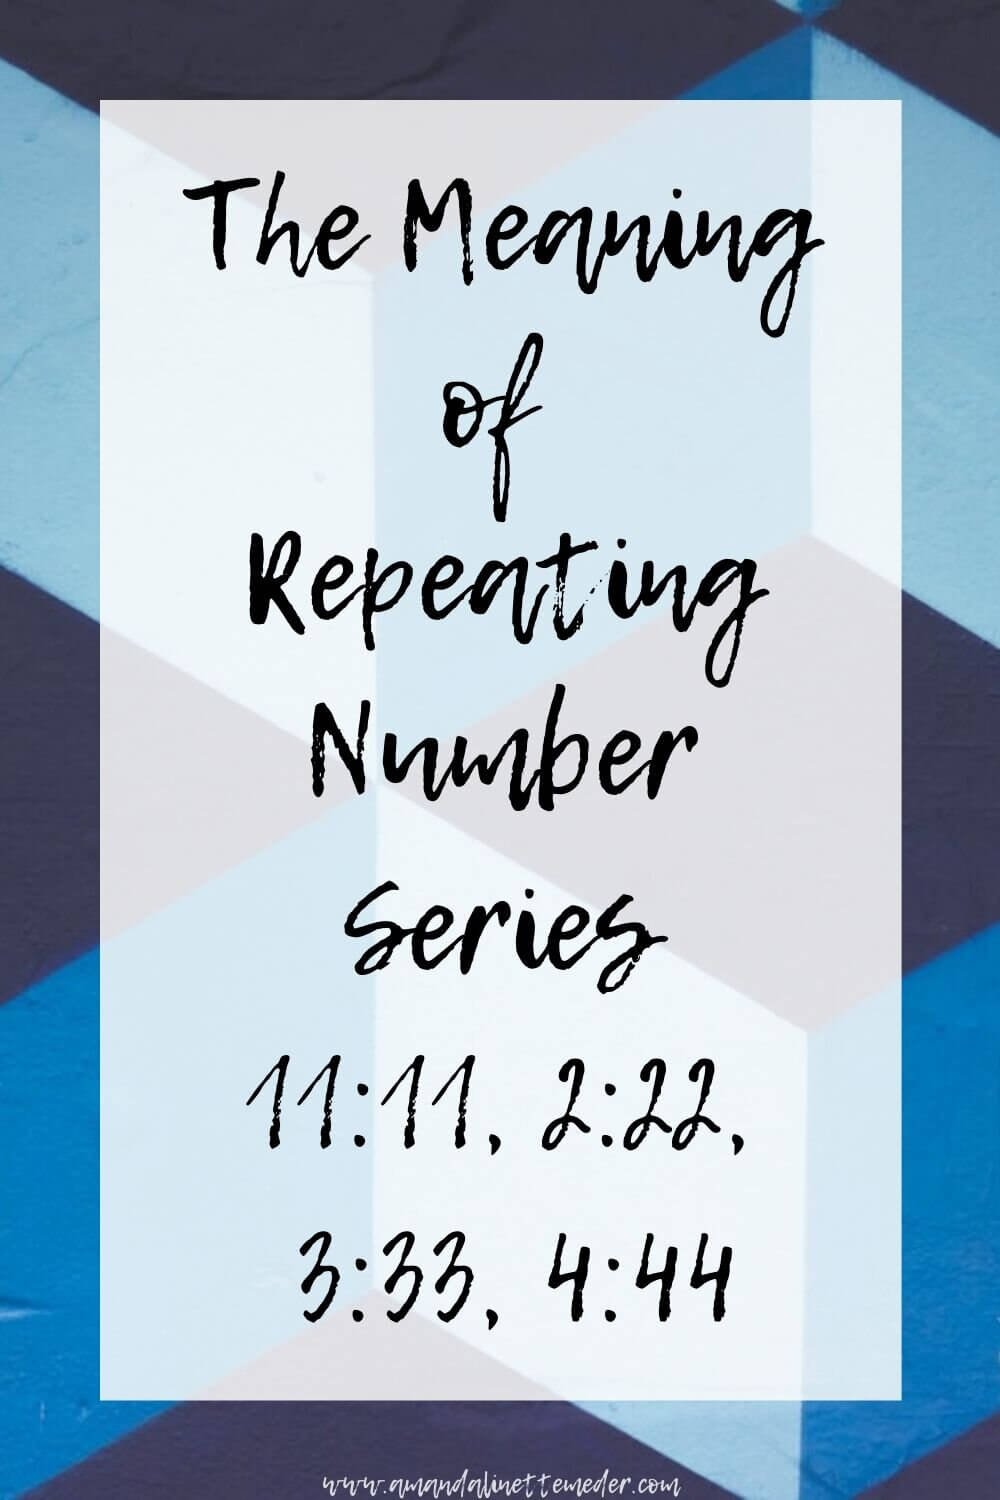 Meaning Of Repeating Number Series 11:11, 2:22, 3:33, 4:44 — Amanda Linette  Meder